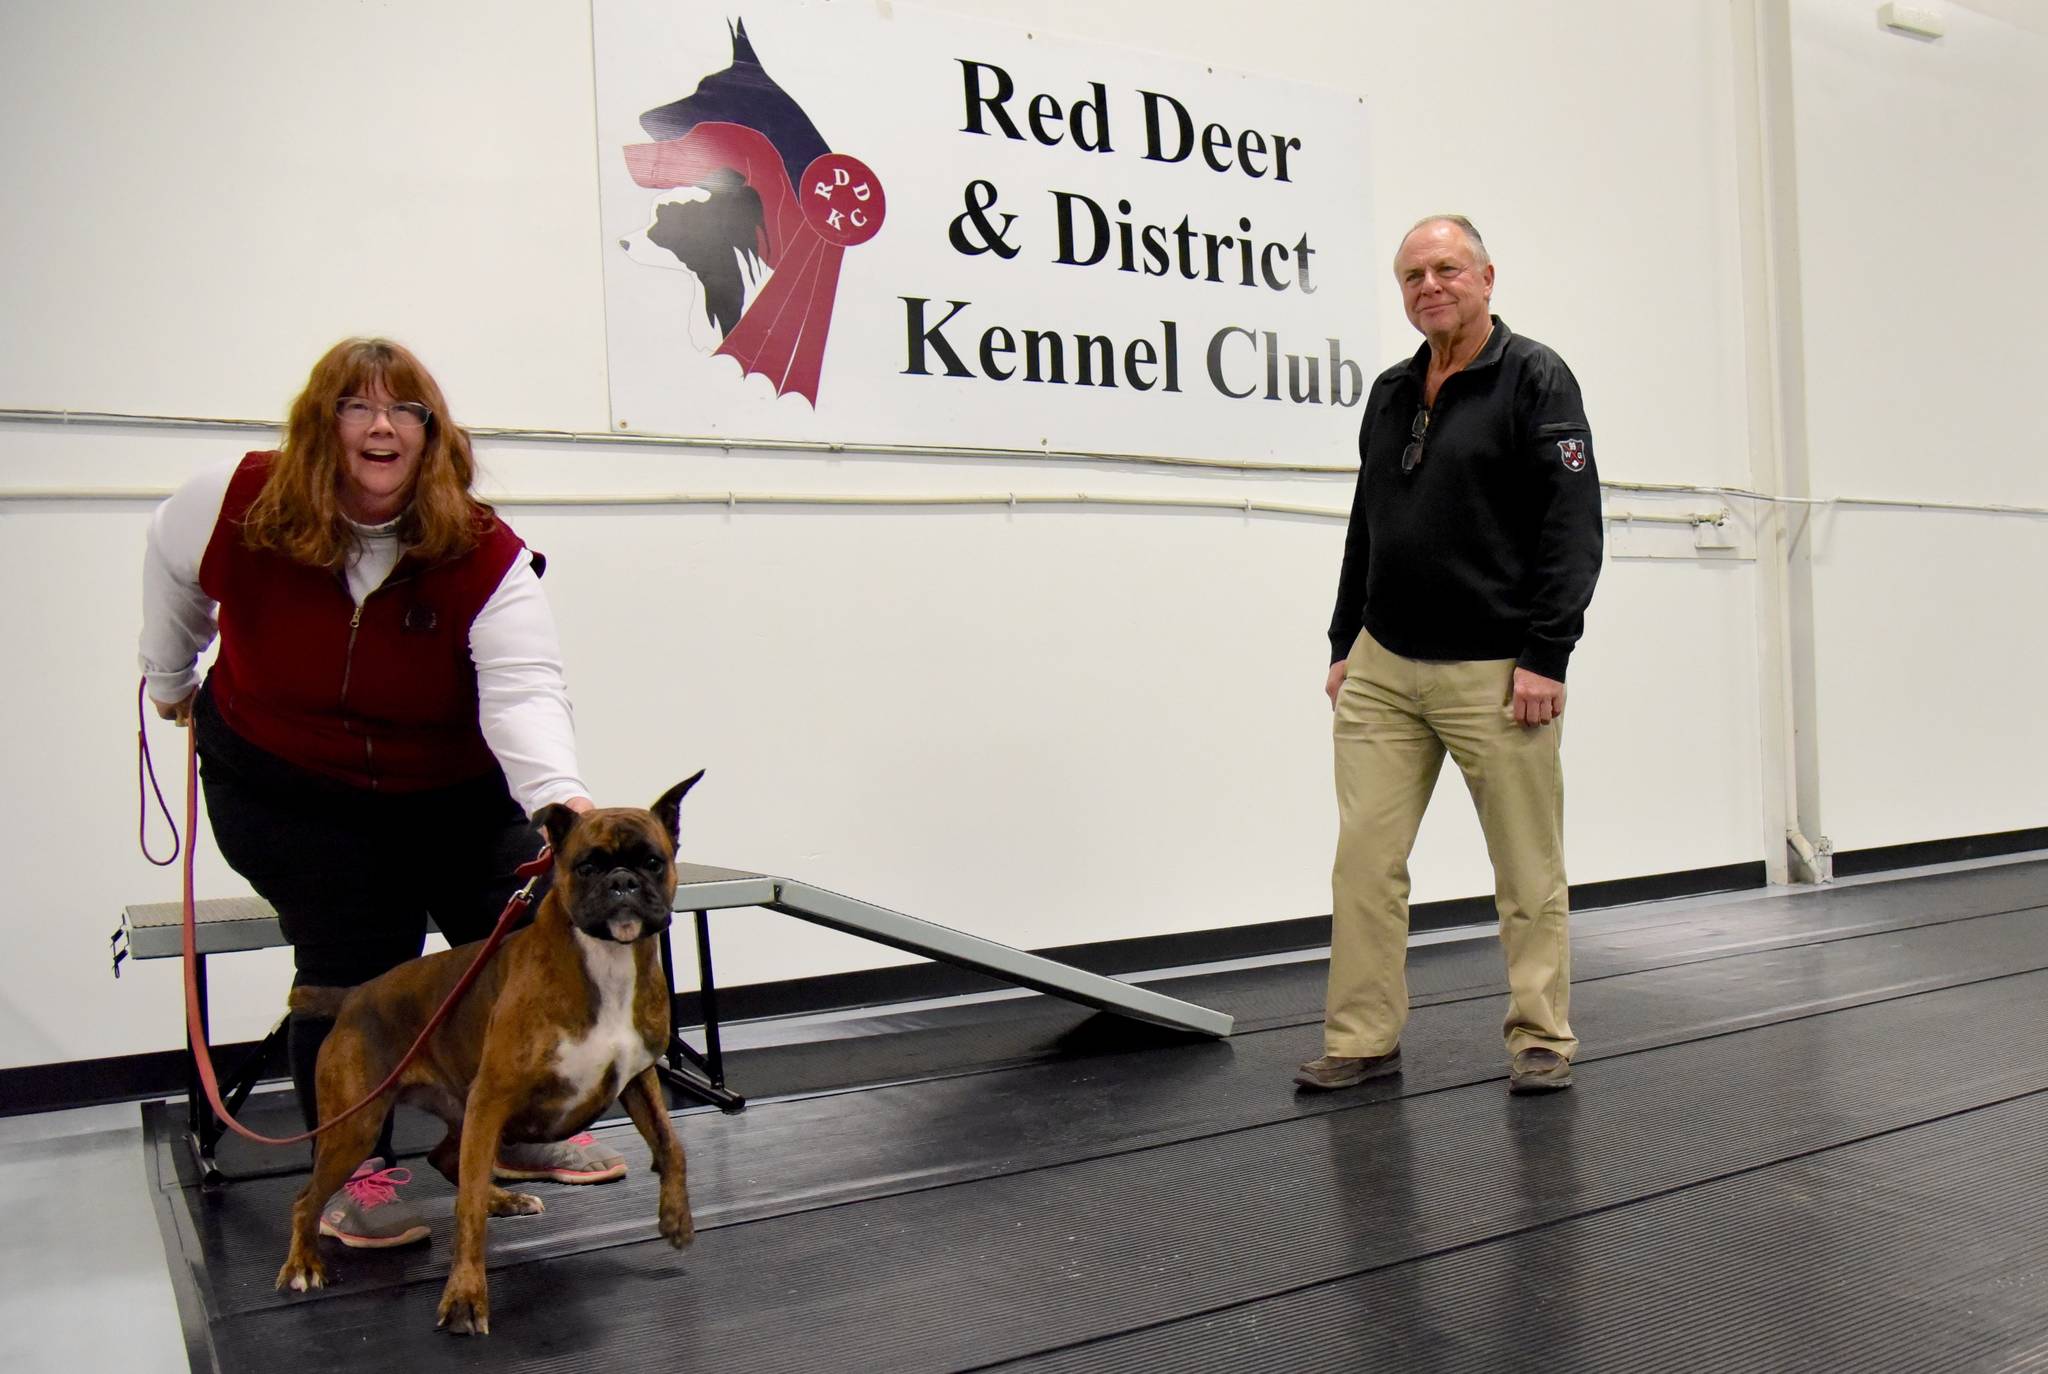 NEW HOME - Celi, a three-year-old Boxer, can hardly contain his excitement as he explores the Red Deer and District Kennel Club’s new facility. Celi is pictured with his human Cindy Thomas and Ivan Busenius, members of the Kennel Club, on Nov 29th.Michelle Falk/Red Deer Express